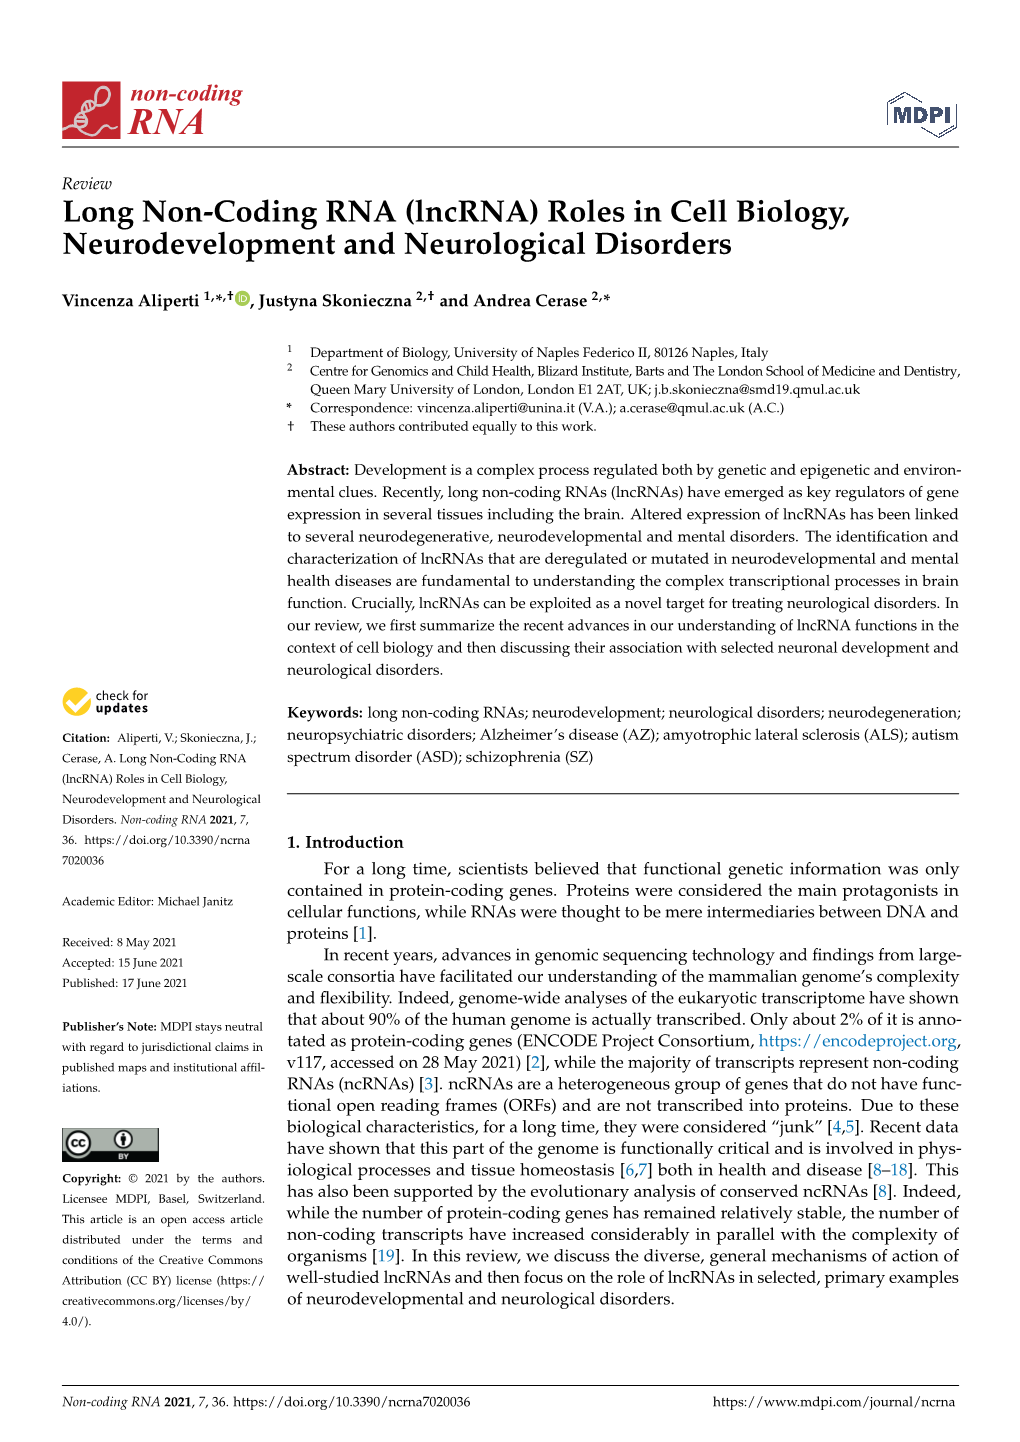 Long Non-Coding RNA (Lncrna) Roles in Cell Biology, Neurodevelopment and Neurological Disorders